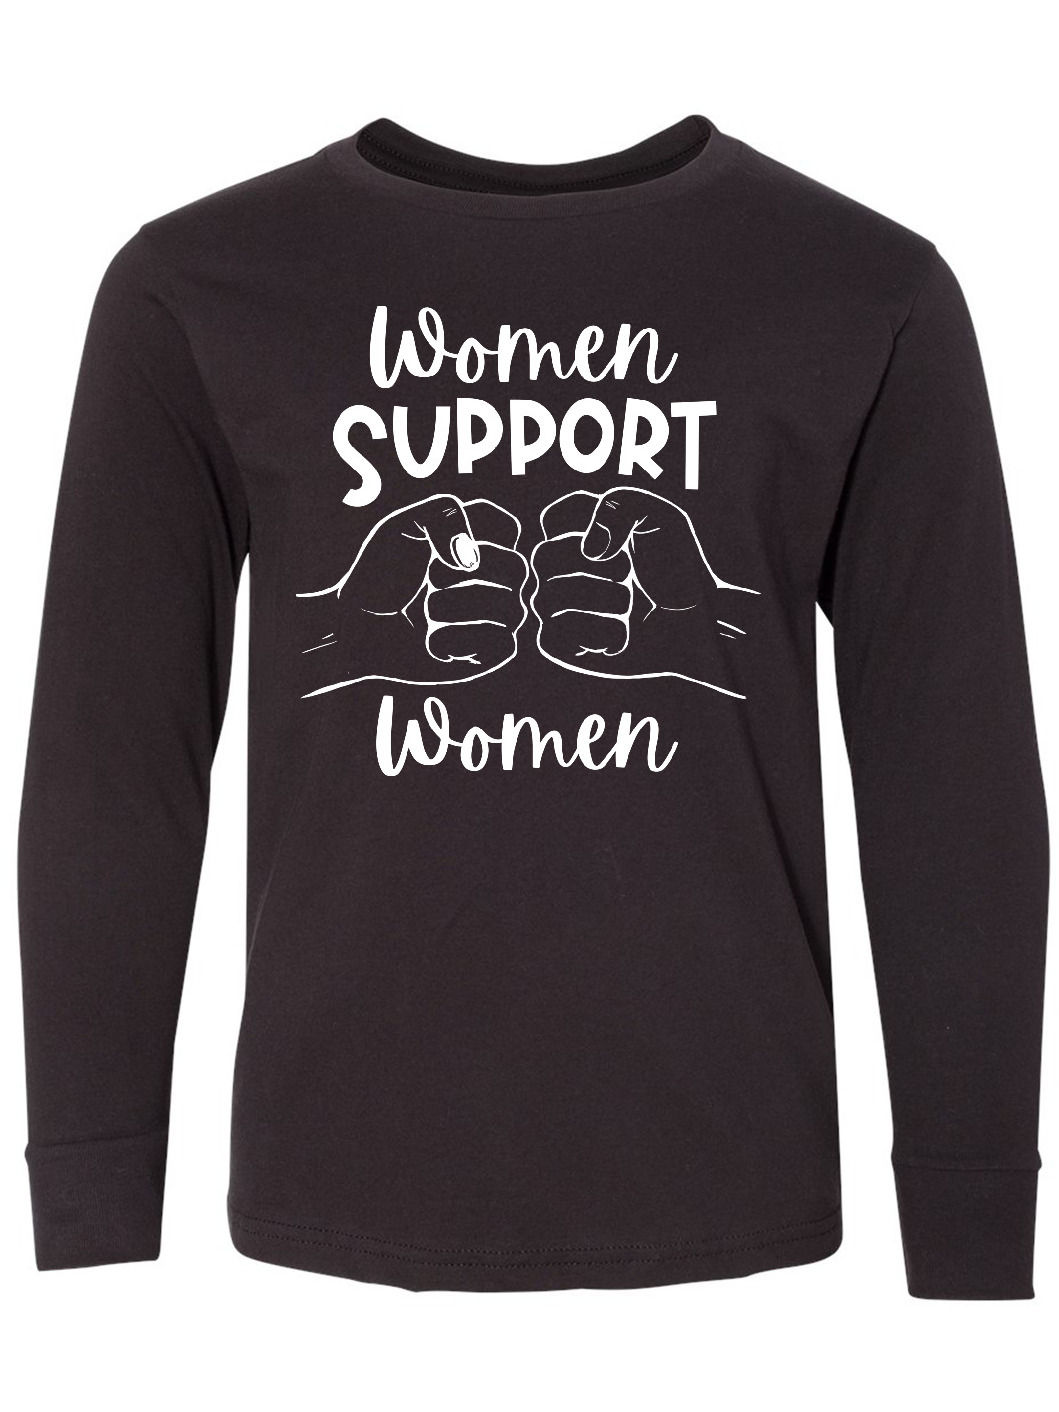 Inktastic Women Support Women Fist Bump Long Sleeve Youth T-Shirt - image 1 of 4